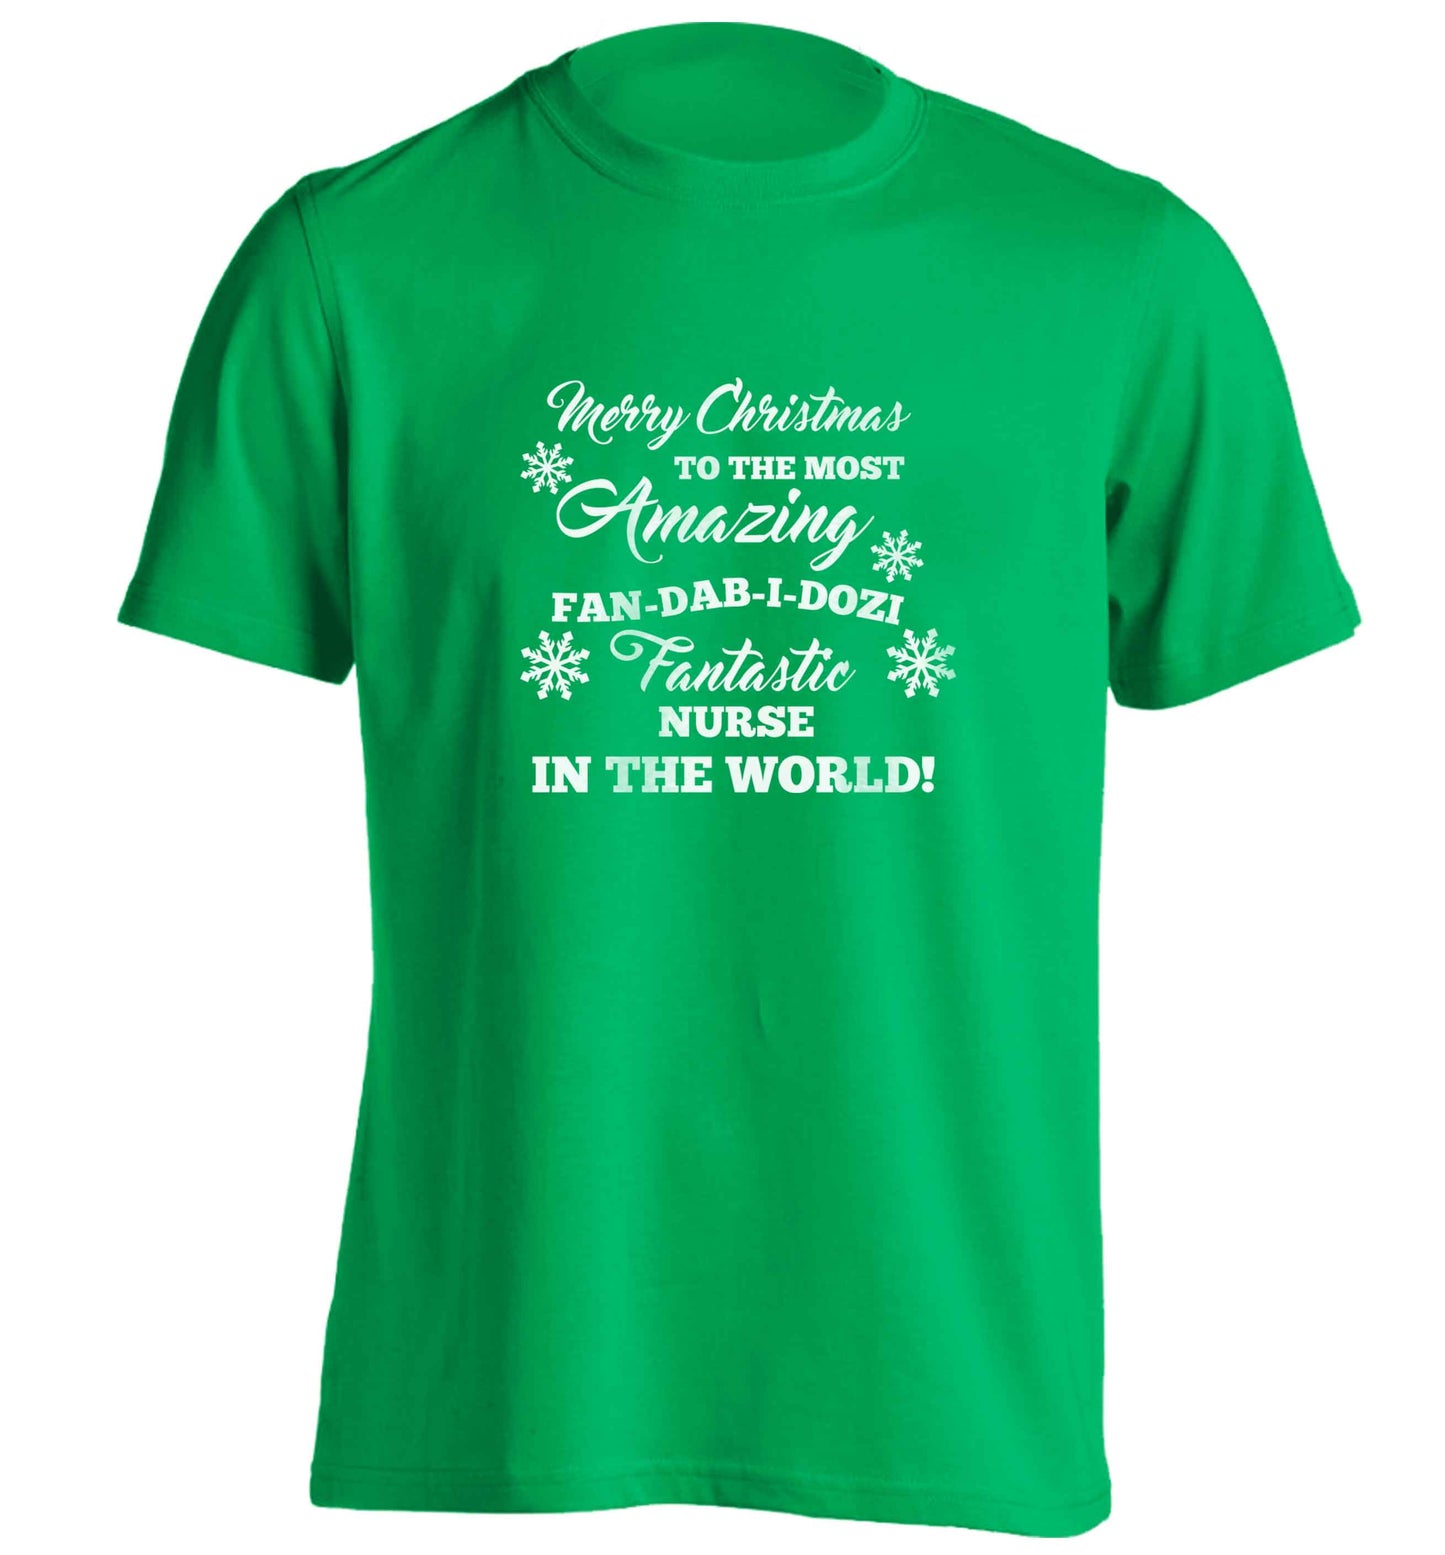 Merry Christmas to the most amazing nurse in the world! adults unisex green Tshirt 2XL